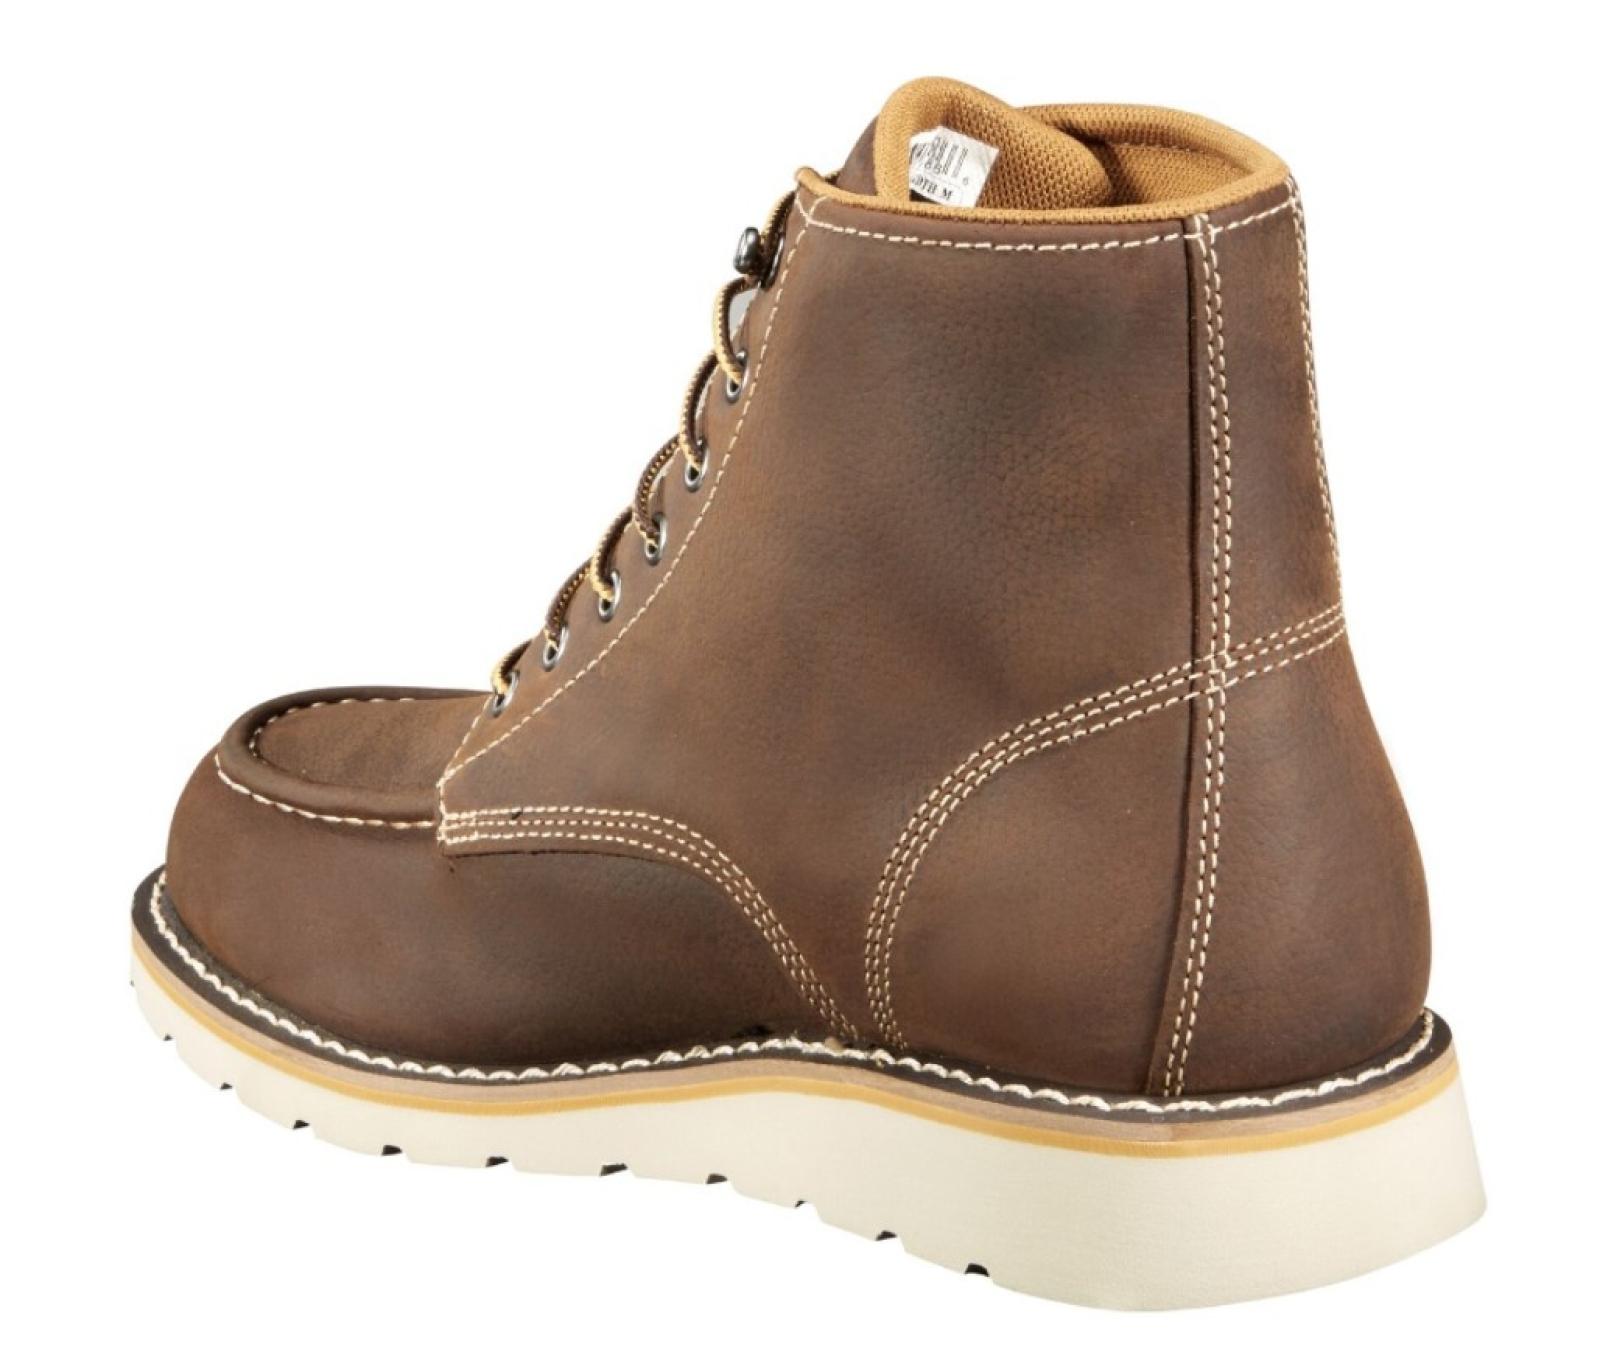 Carhartt 6-Inch Non-Safety Toe Wedge Boot Angled Away Profile View